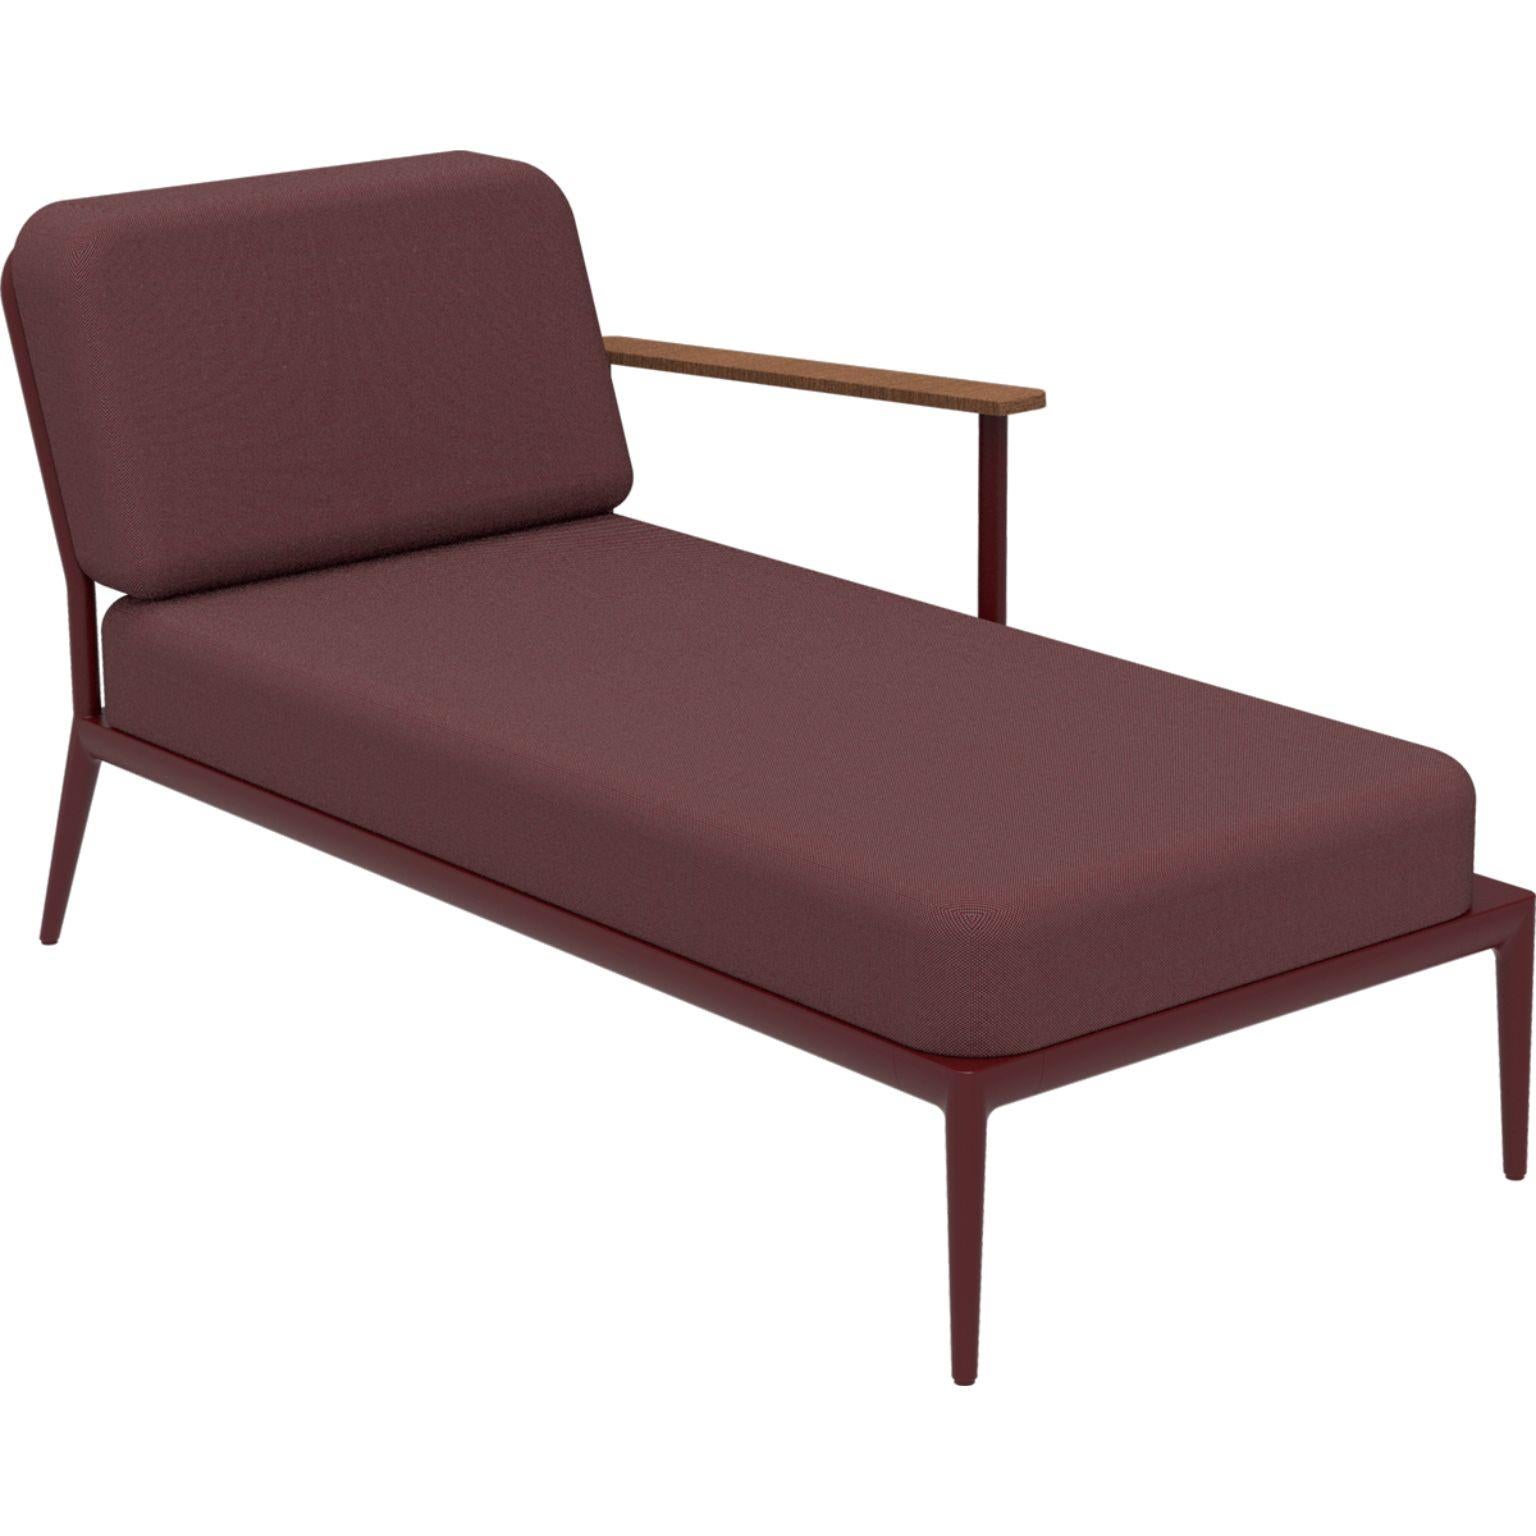 Nature Burgundy Left Chaise Longue by MOWEE
Dimensions: D155 x W76 x H81 cm (seat height 42 cm).
Material: Aluminum, upholstery and Iroko Wood.
Weight: 28 kg.
Also available in different colors and finishes. Please contact us.

An unmistakable